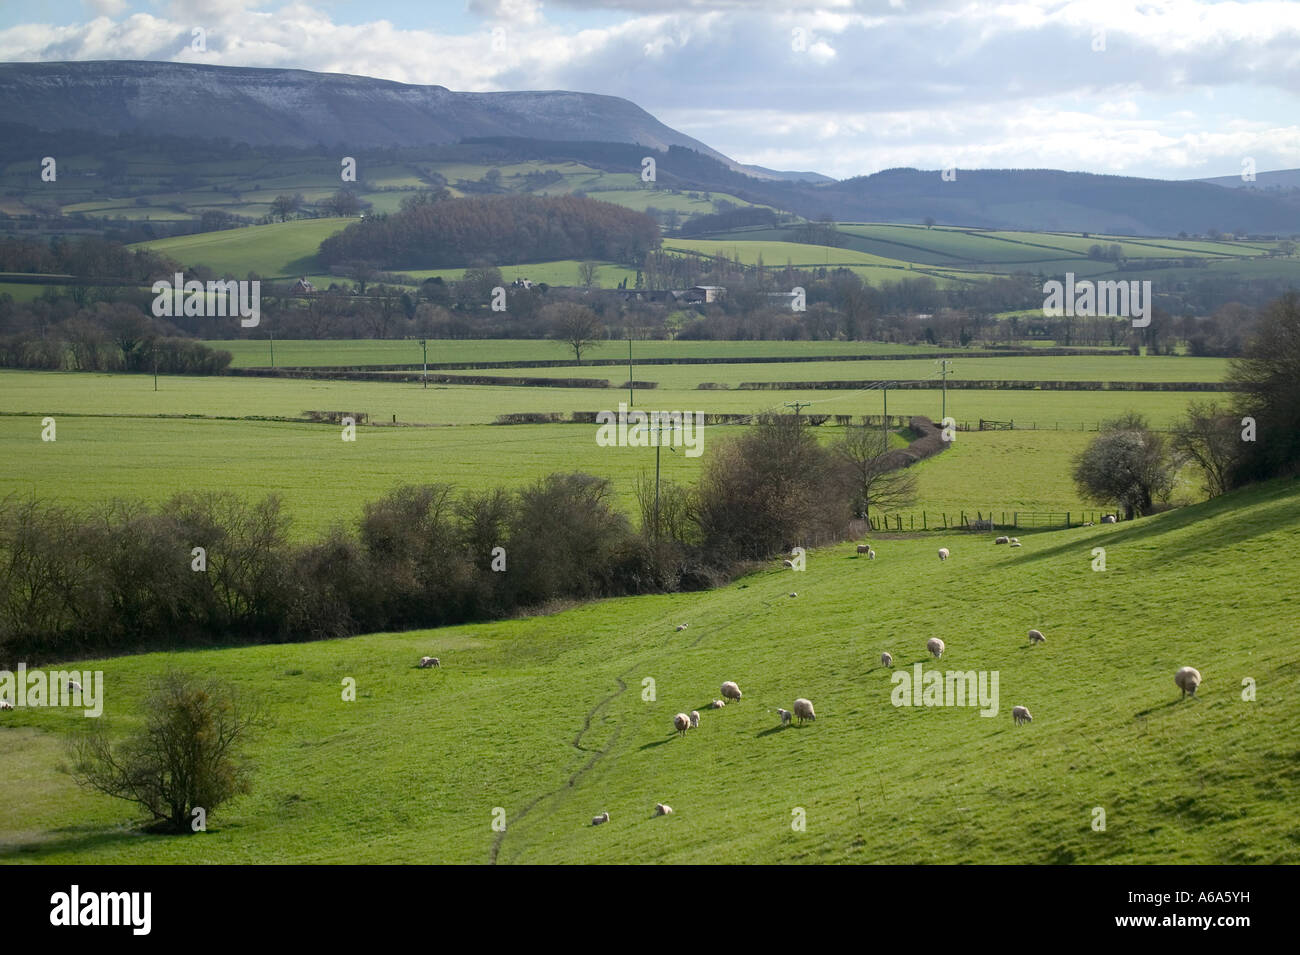 Landscape image of rolling hills with sheep grazing on grass mountains in the distance Stock Photo